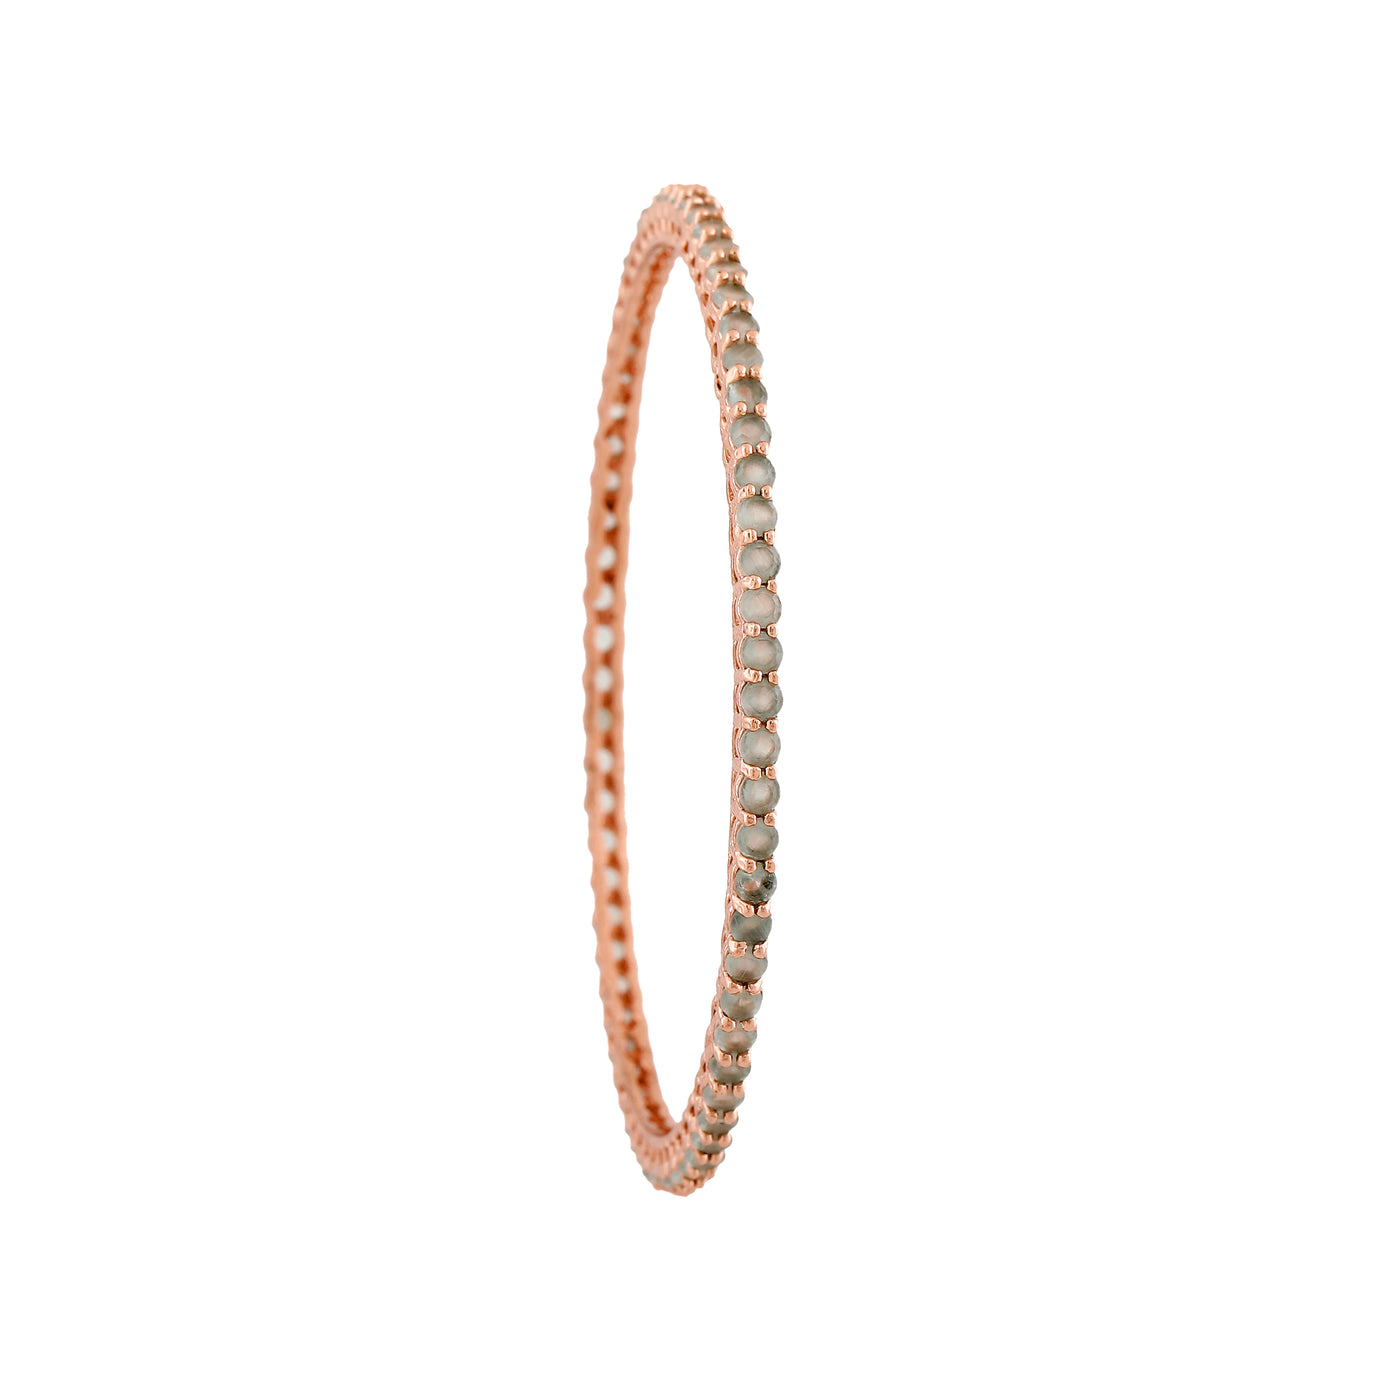 Estele Rose Gold Plated CZ Fascinating Designer Bangles with Mint Green Crystals for Women